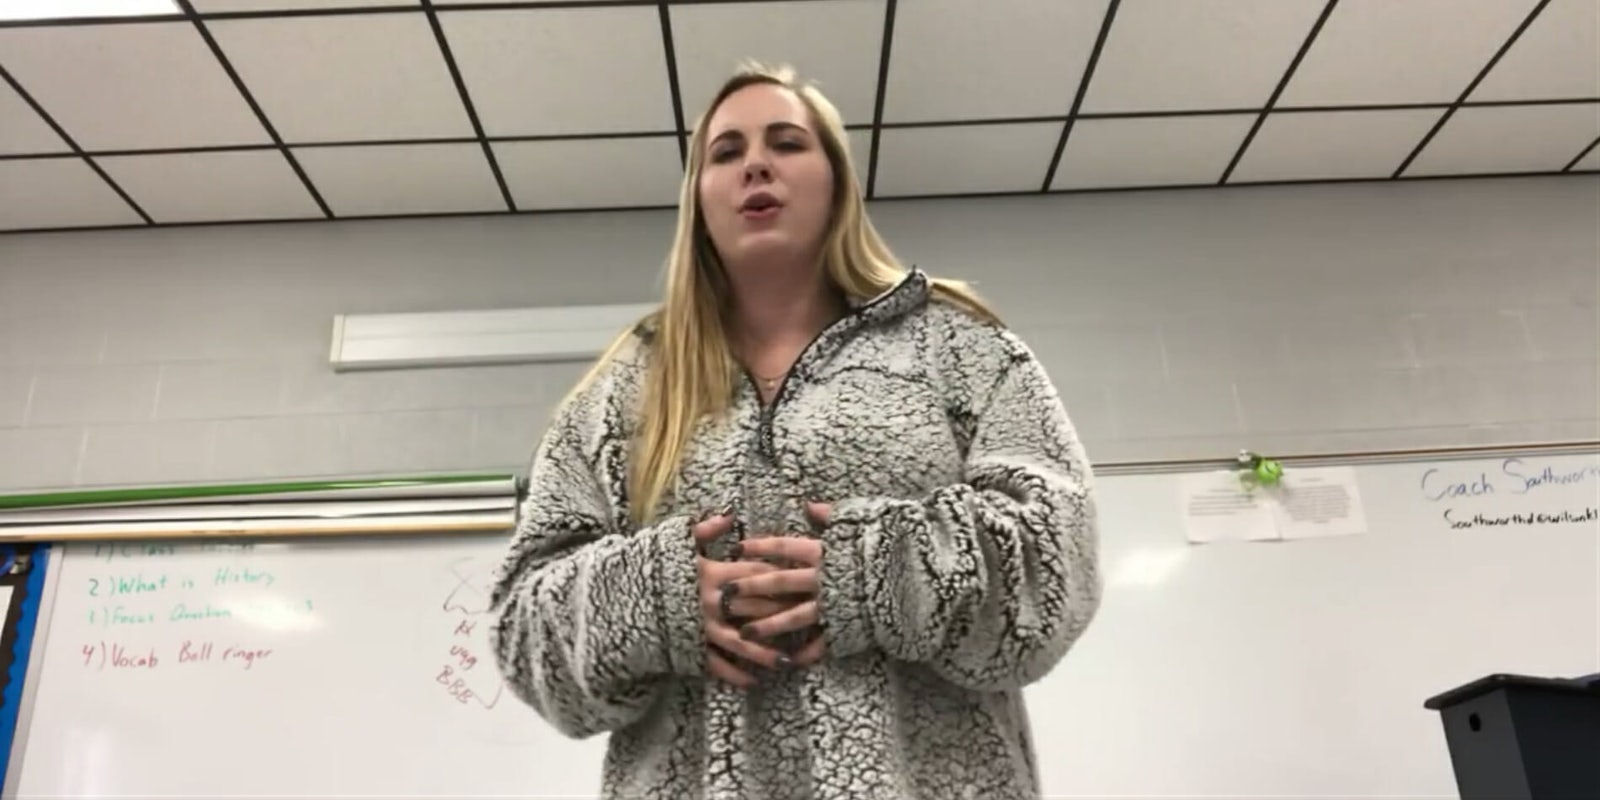 Lebanon High School student Emily Gipson faced a two-day suspension after publishing a viral anti-bullying video.